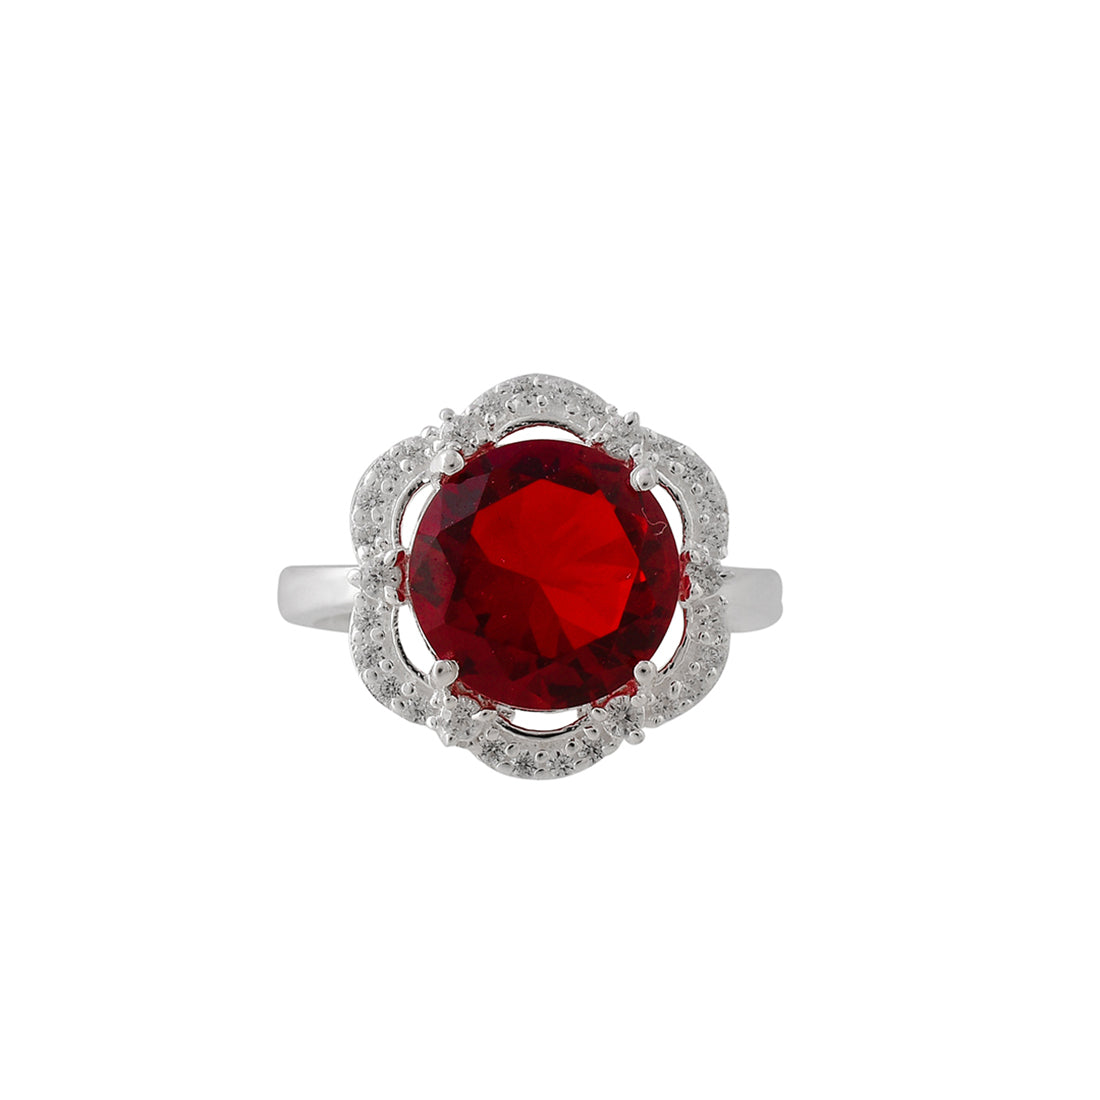 Women's Round Cut Red Ruby Cluster Setting 925 Sterling Silver Ring - Voylla